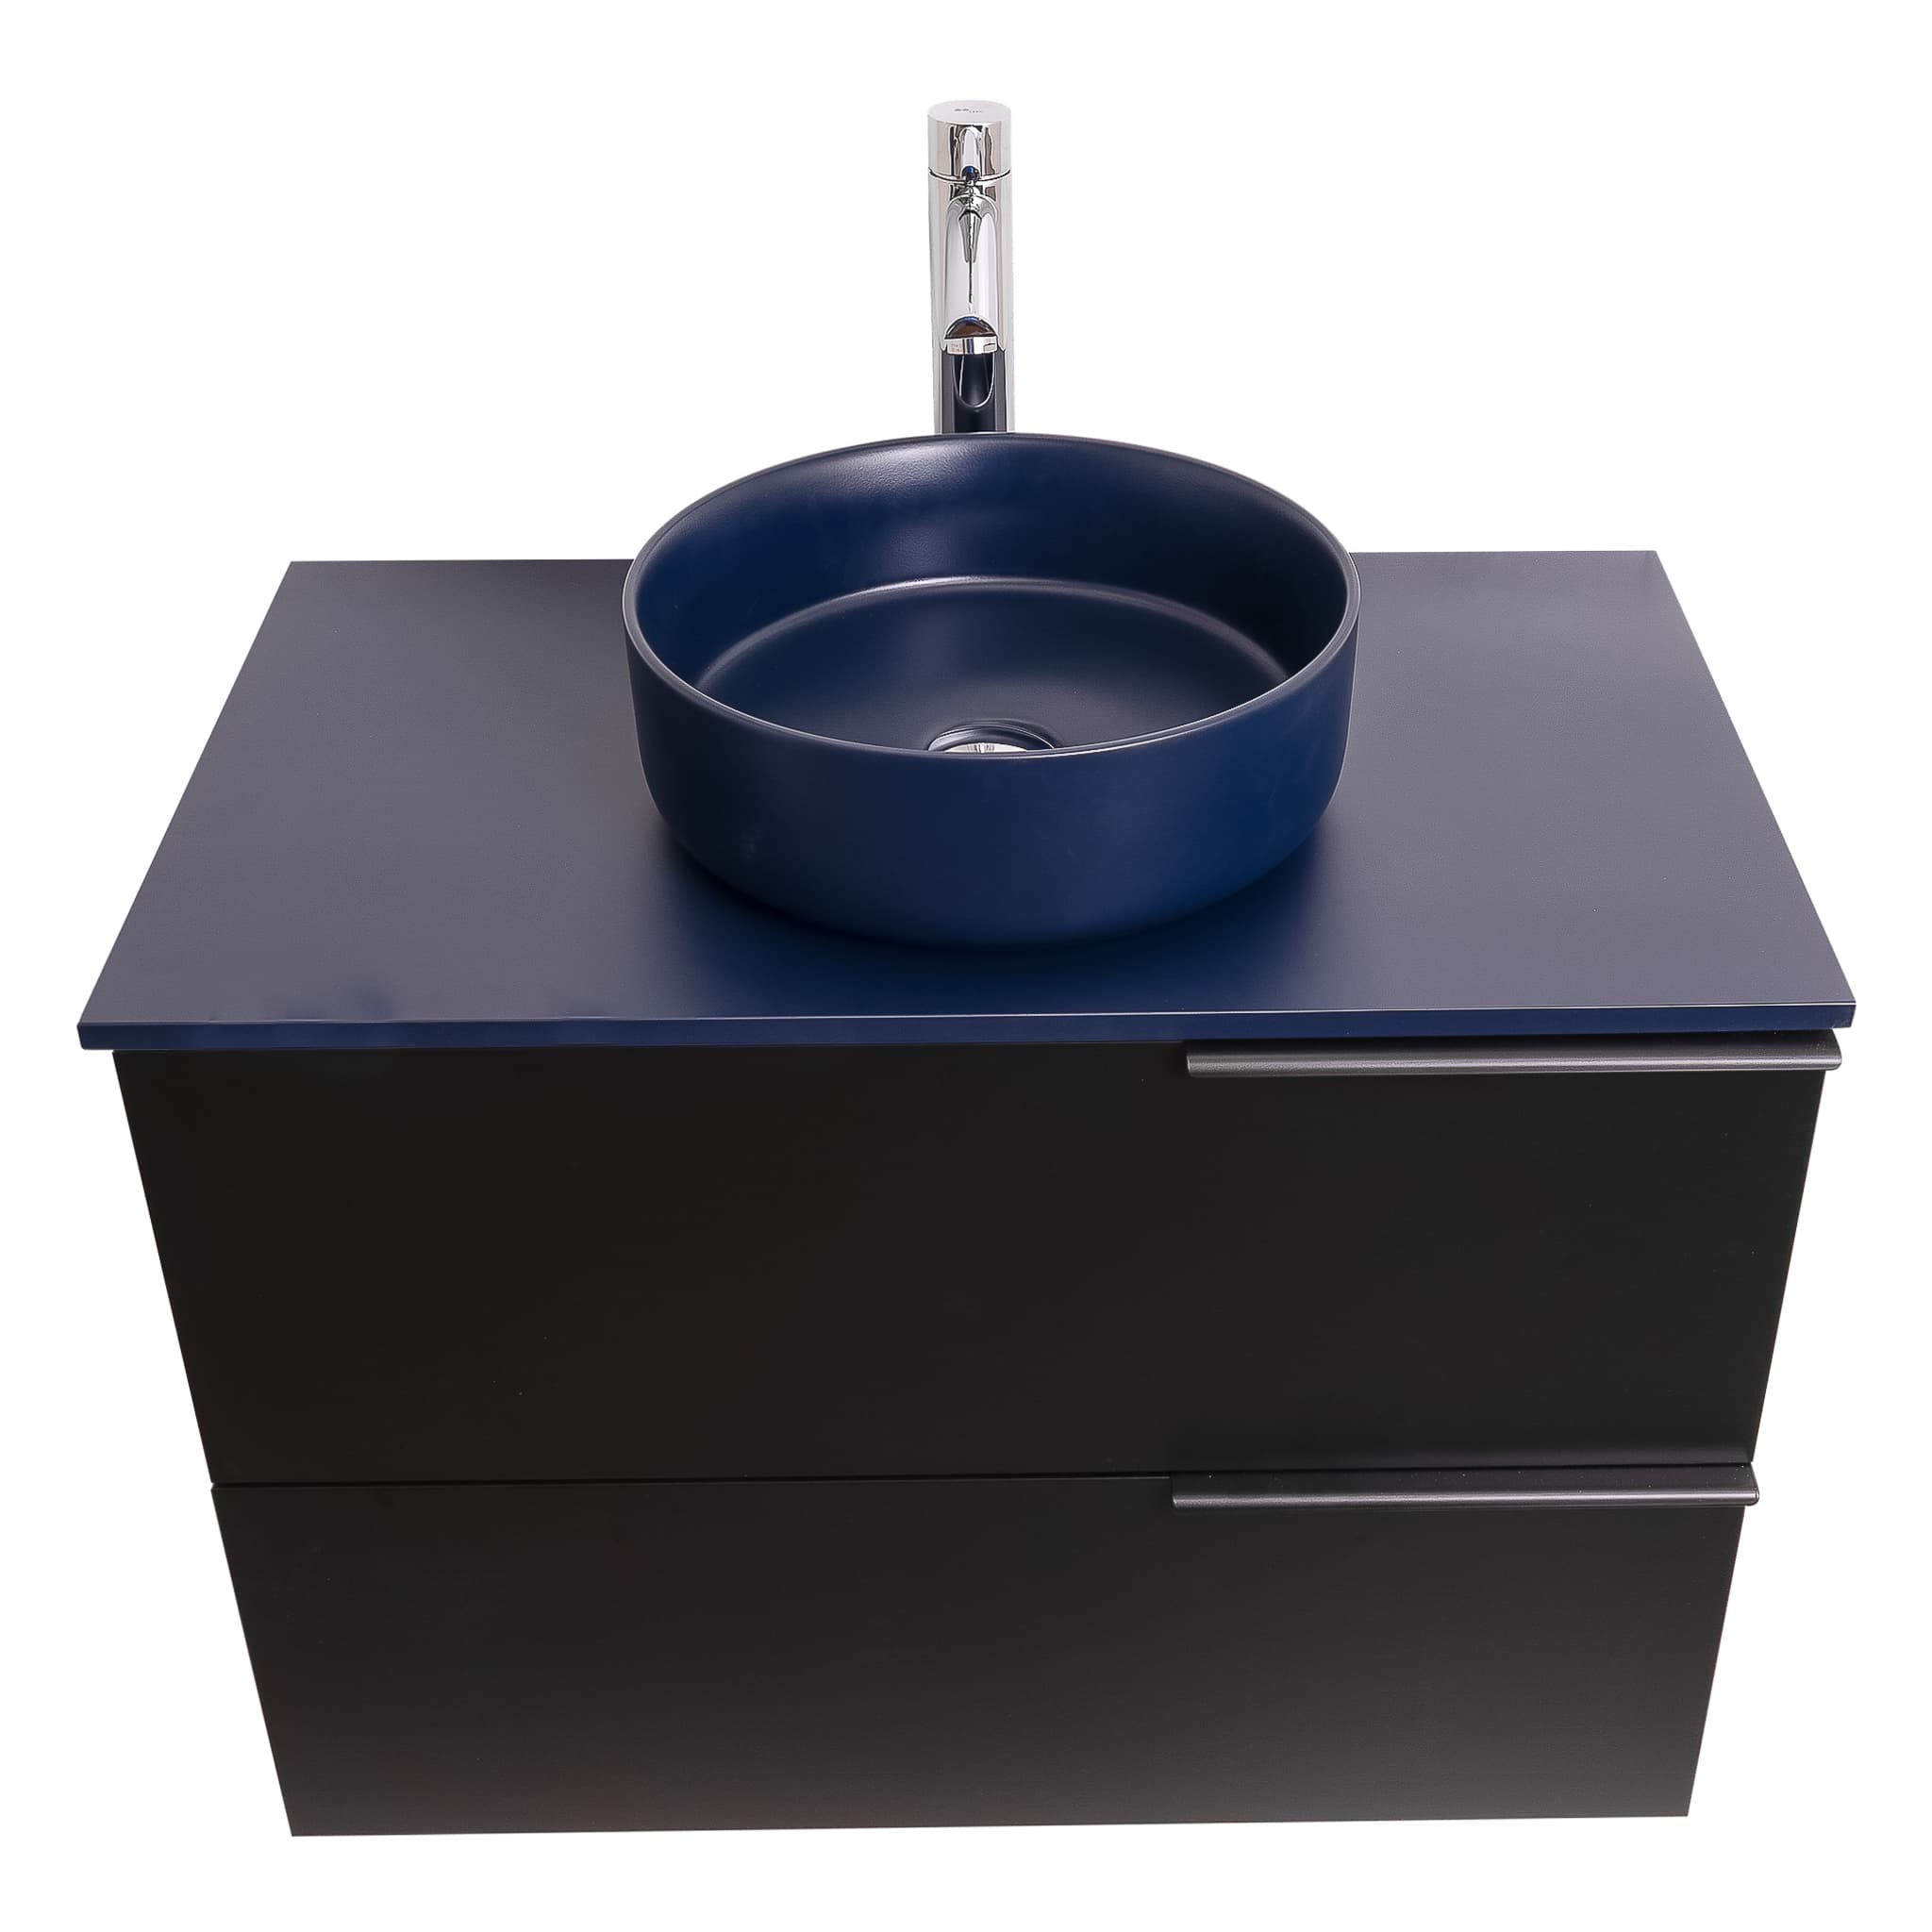 Mallorca 39.5 Matte Black Cabinet, Ares Navy Blue Top And Ares Navy Blue Ceramic Basin, Wall Mounted Modern Vanity Set